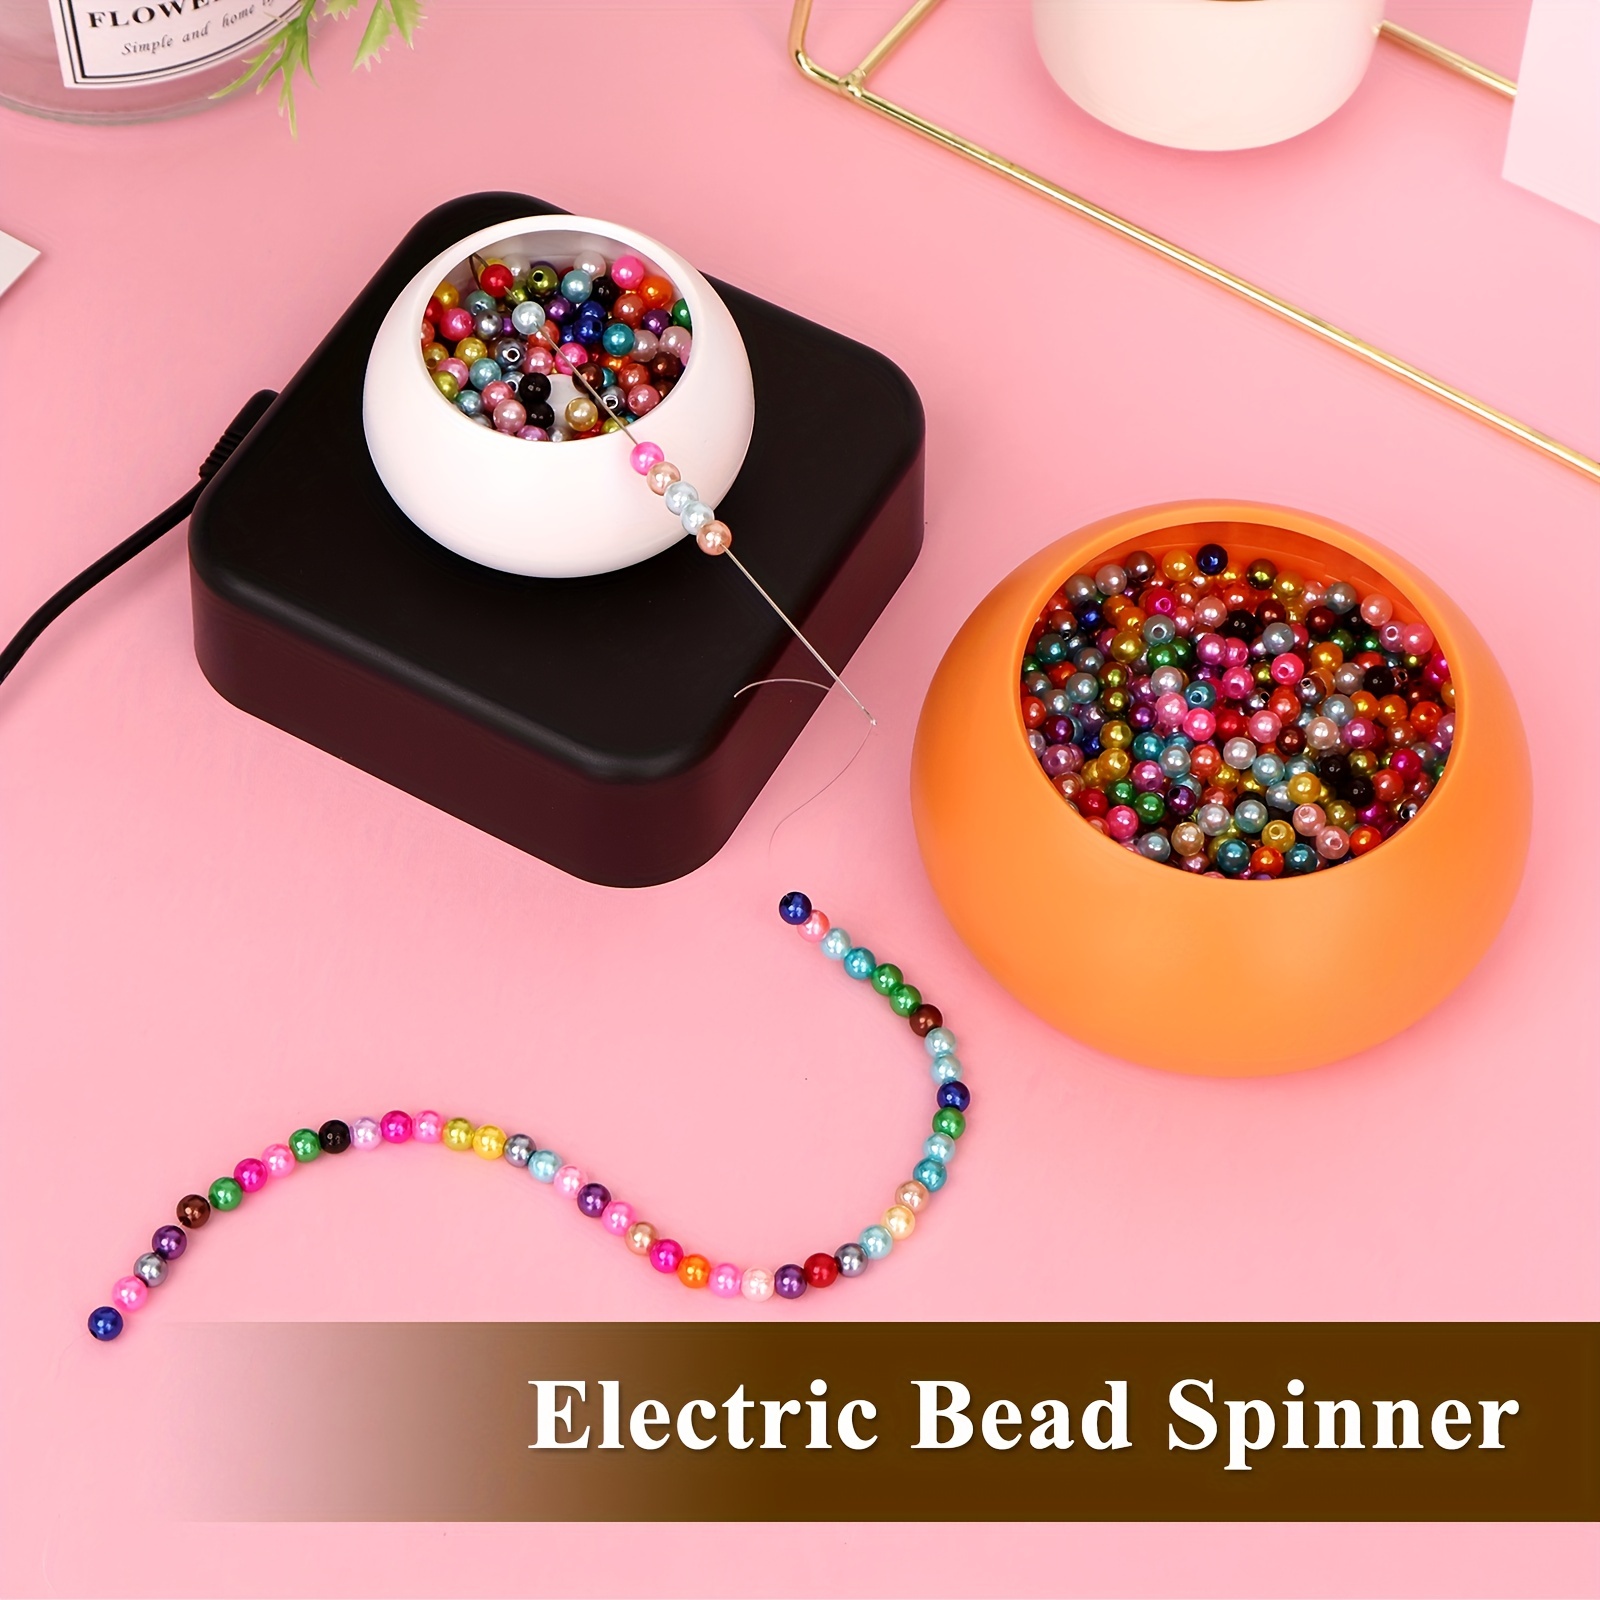 New Electric Bead Spinner For Jewelry Making, Spin Beading Bowl With Needl